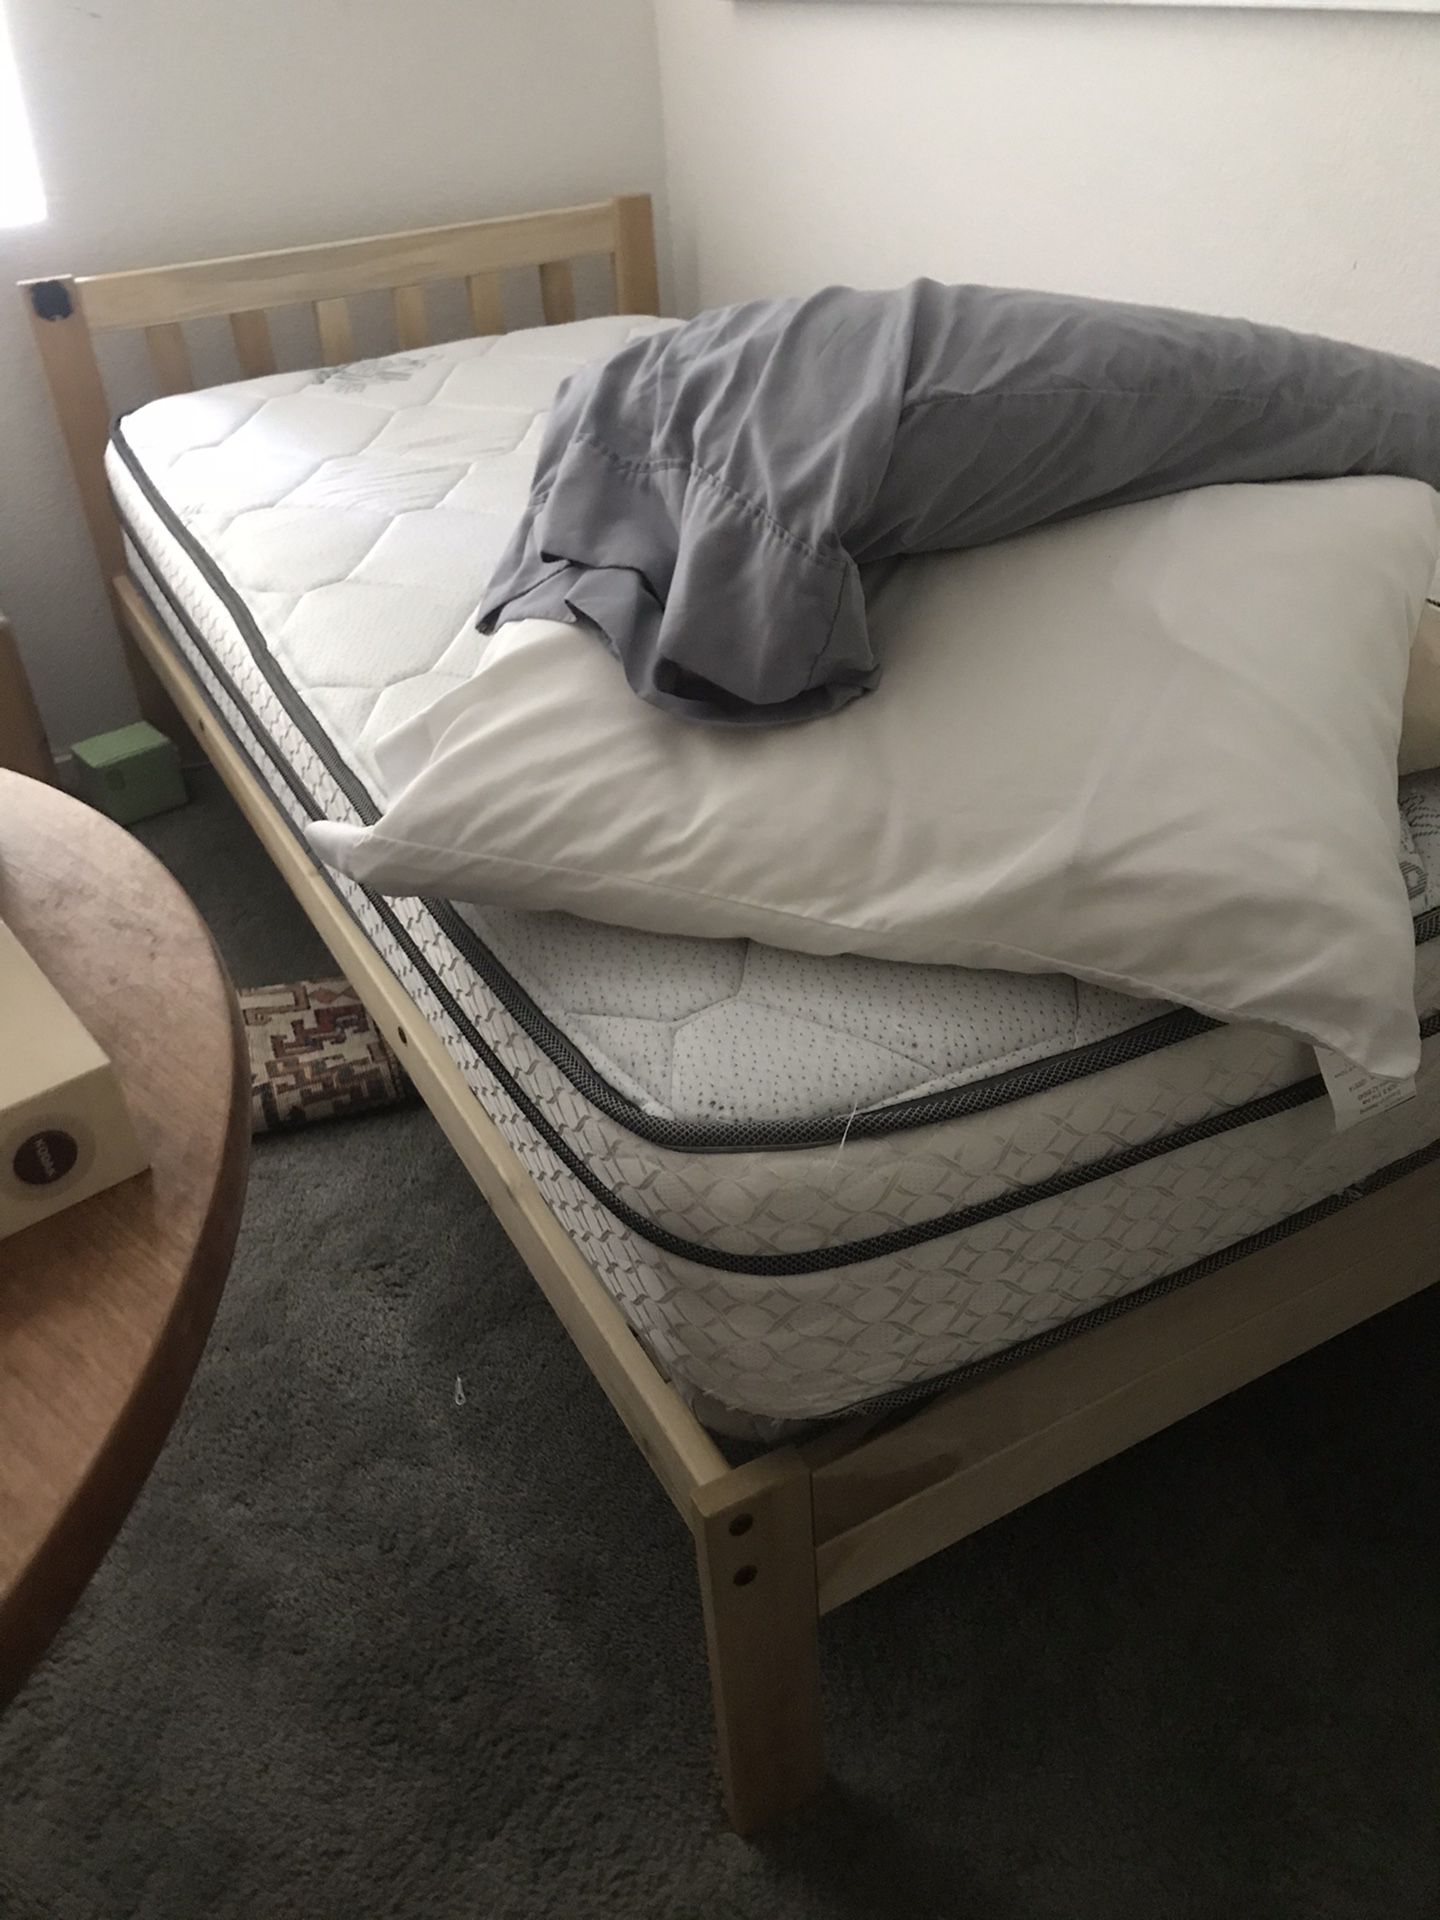 Free Twin XL mattress and bed frame